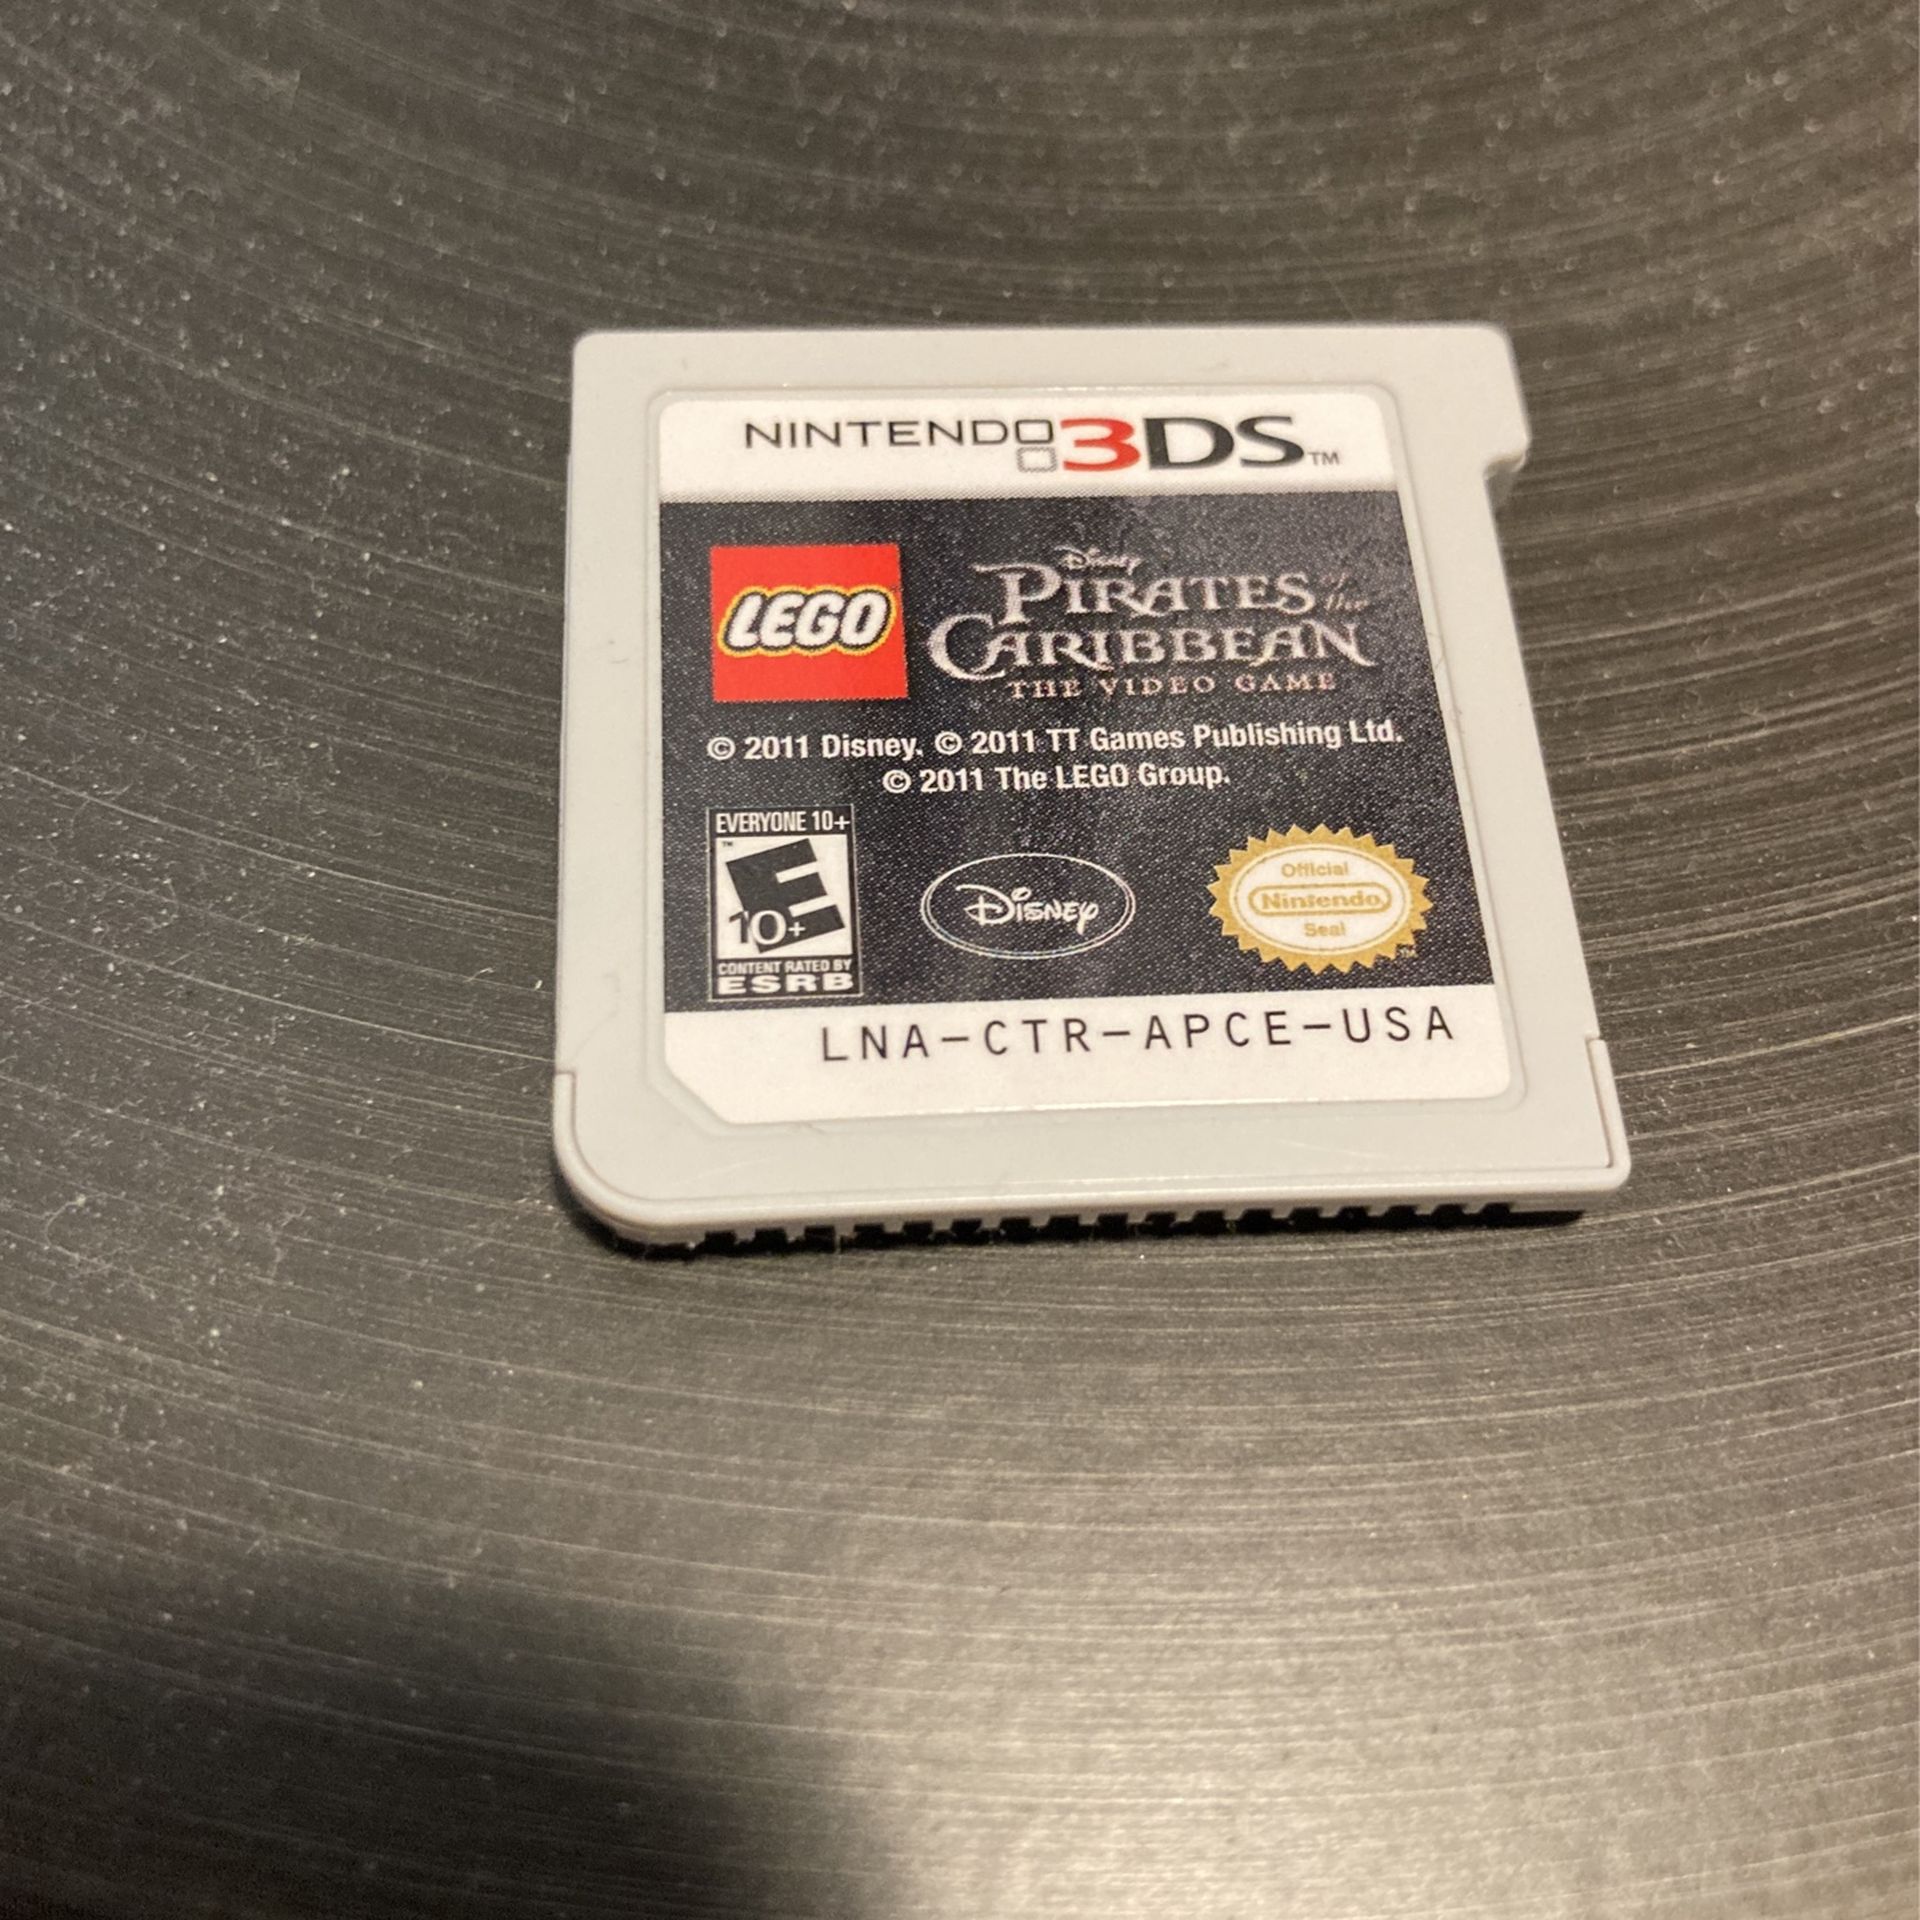 Nintendo 3DS- Lego Pirates Of The Caribbean 